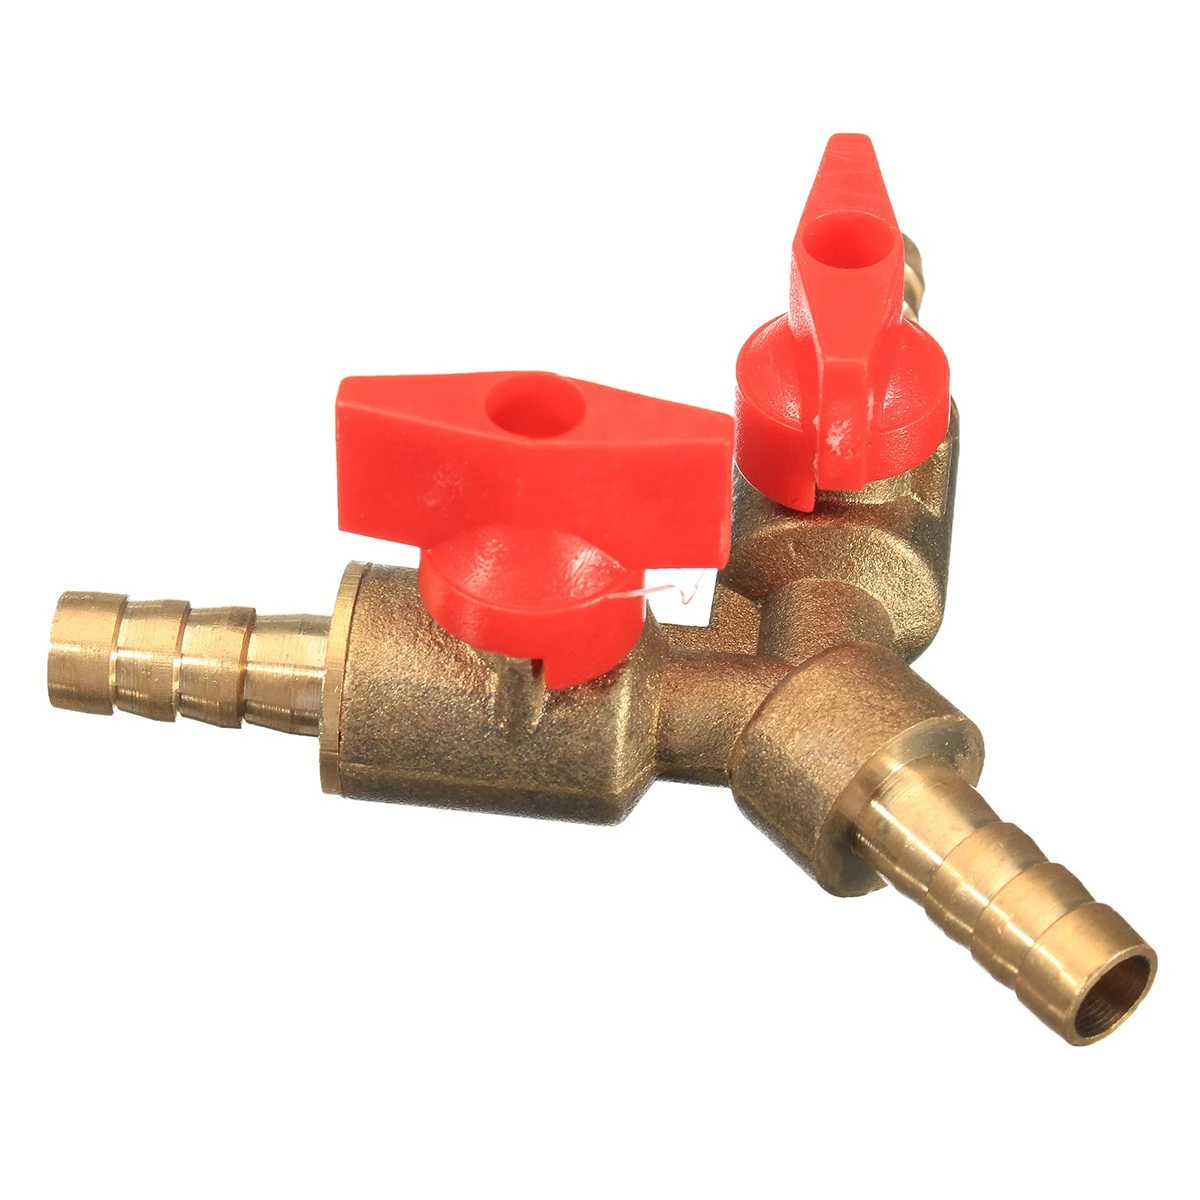 Loriver 3 Way Tee Brass Y Shut off Ball Valve 5/16 8mm Barb Fuel Gas Oil/Valve Clamp 